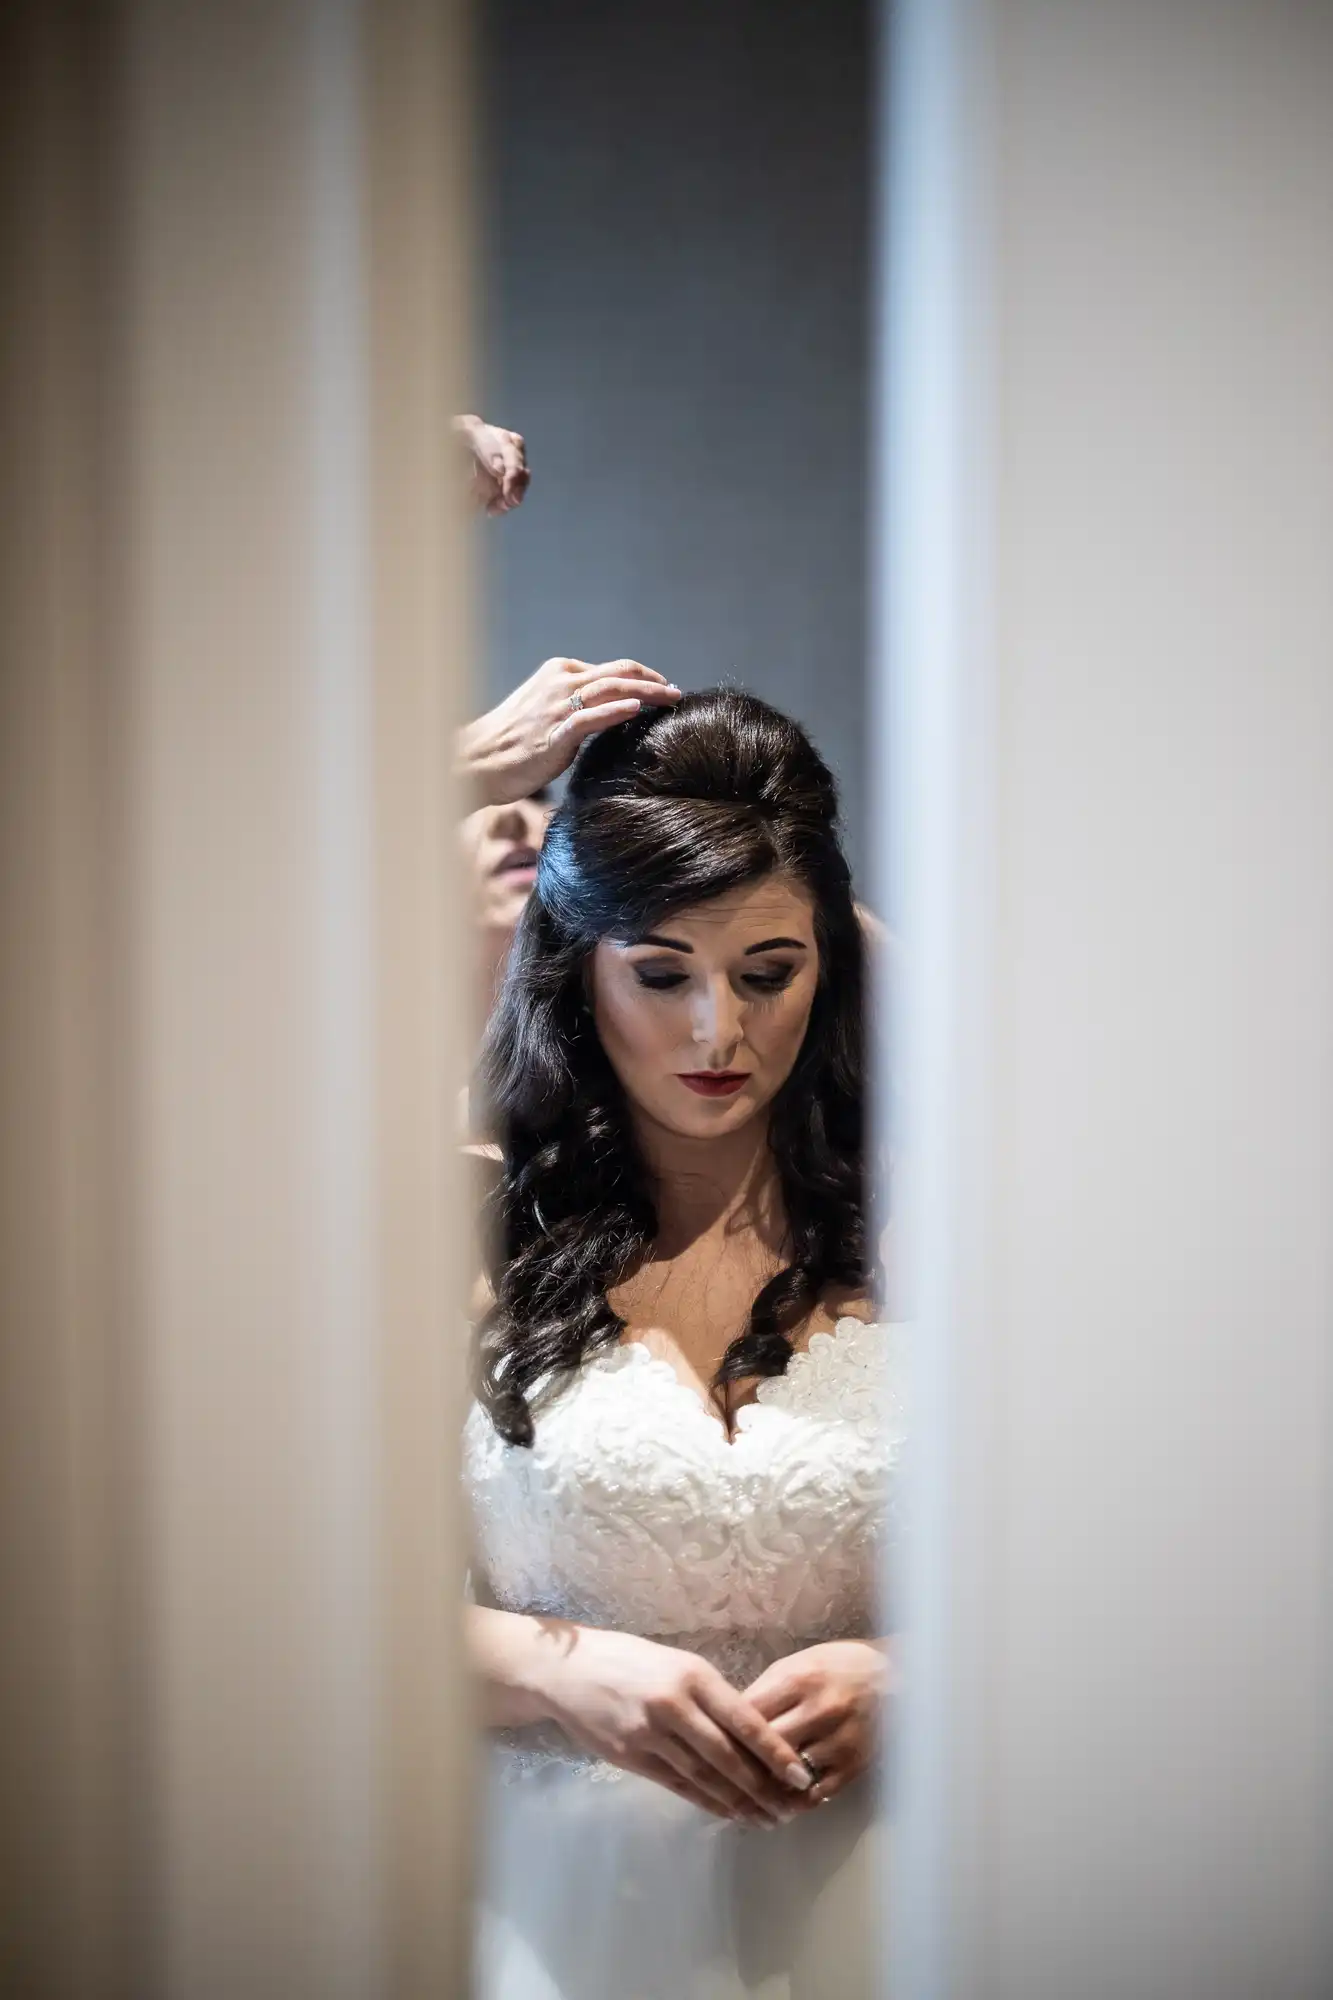 A bride in a white dress is reflected in a mirror as she adjusts her hair, looking downwards thoughtfully.